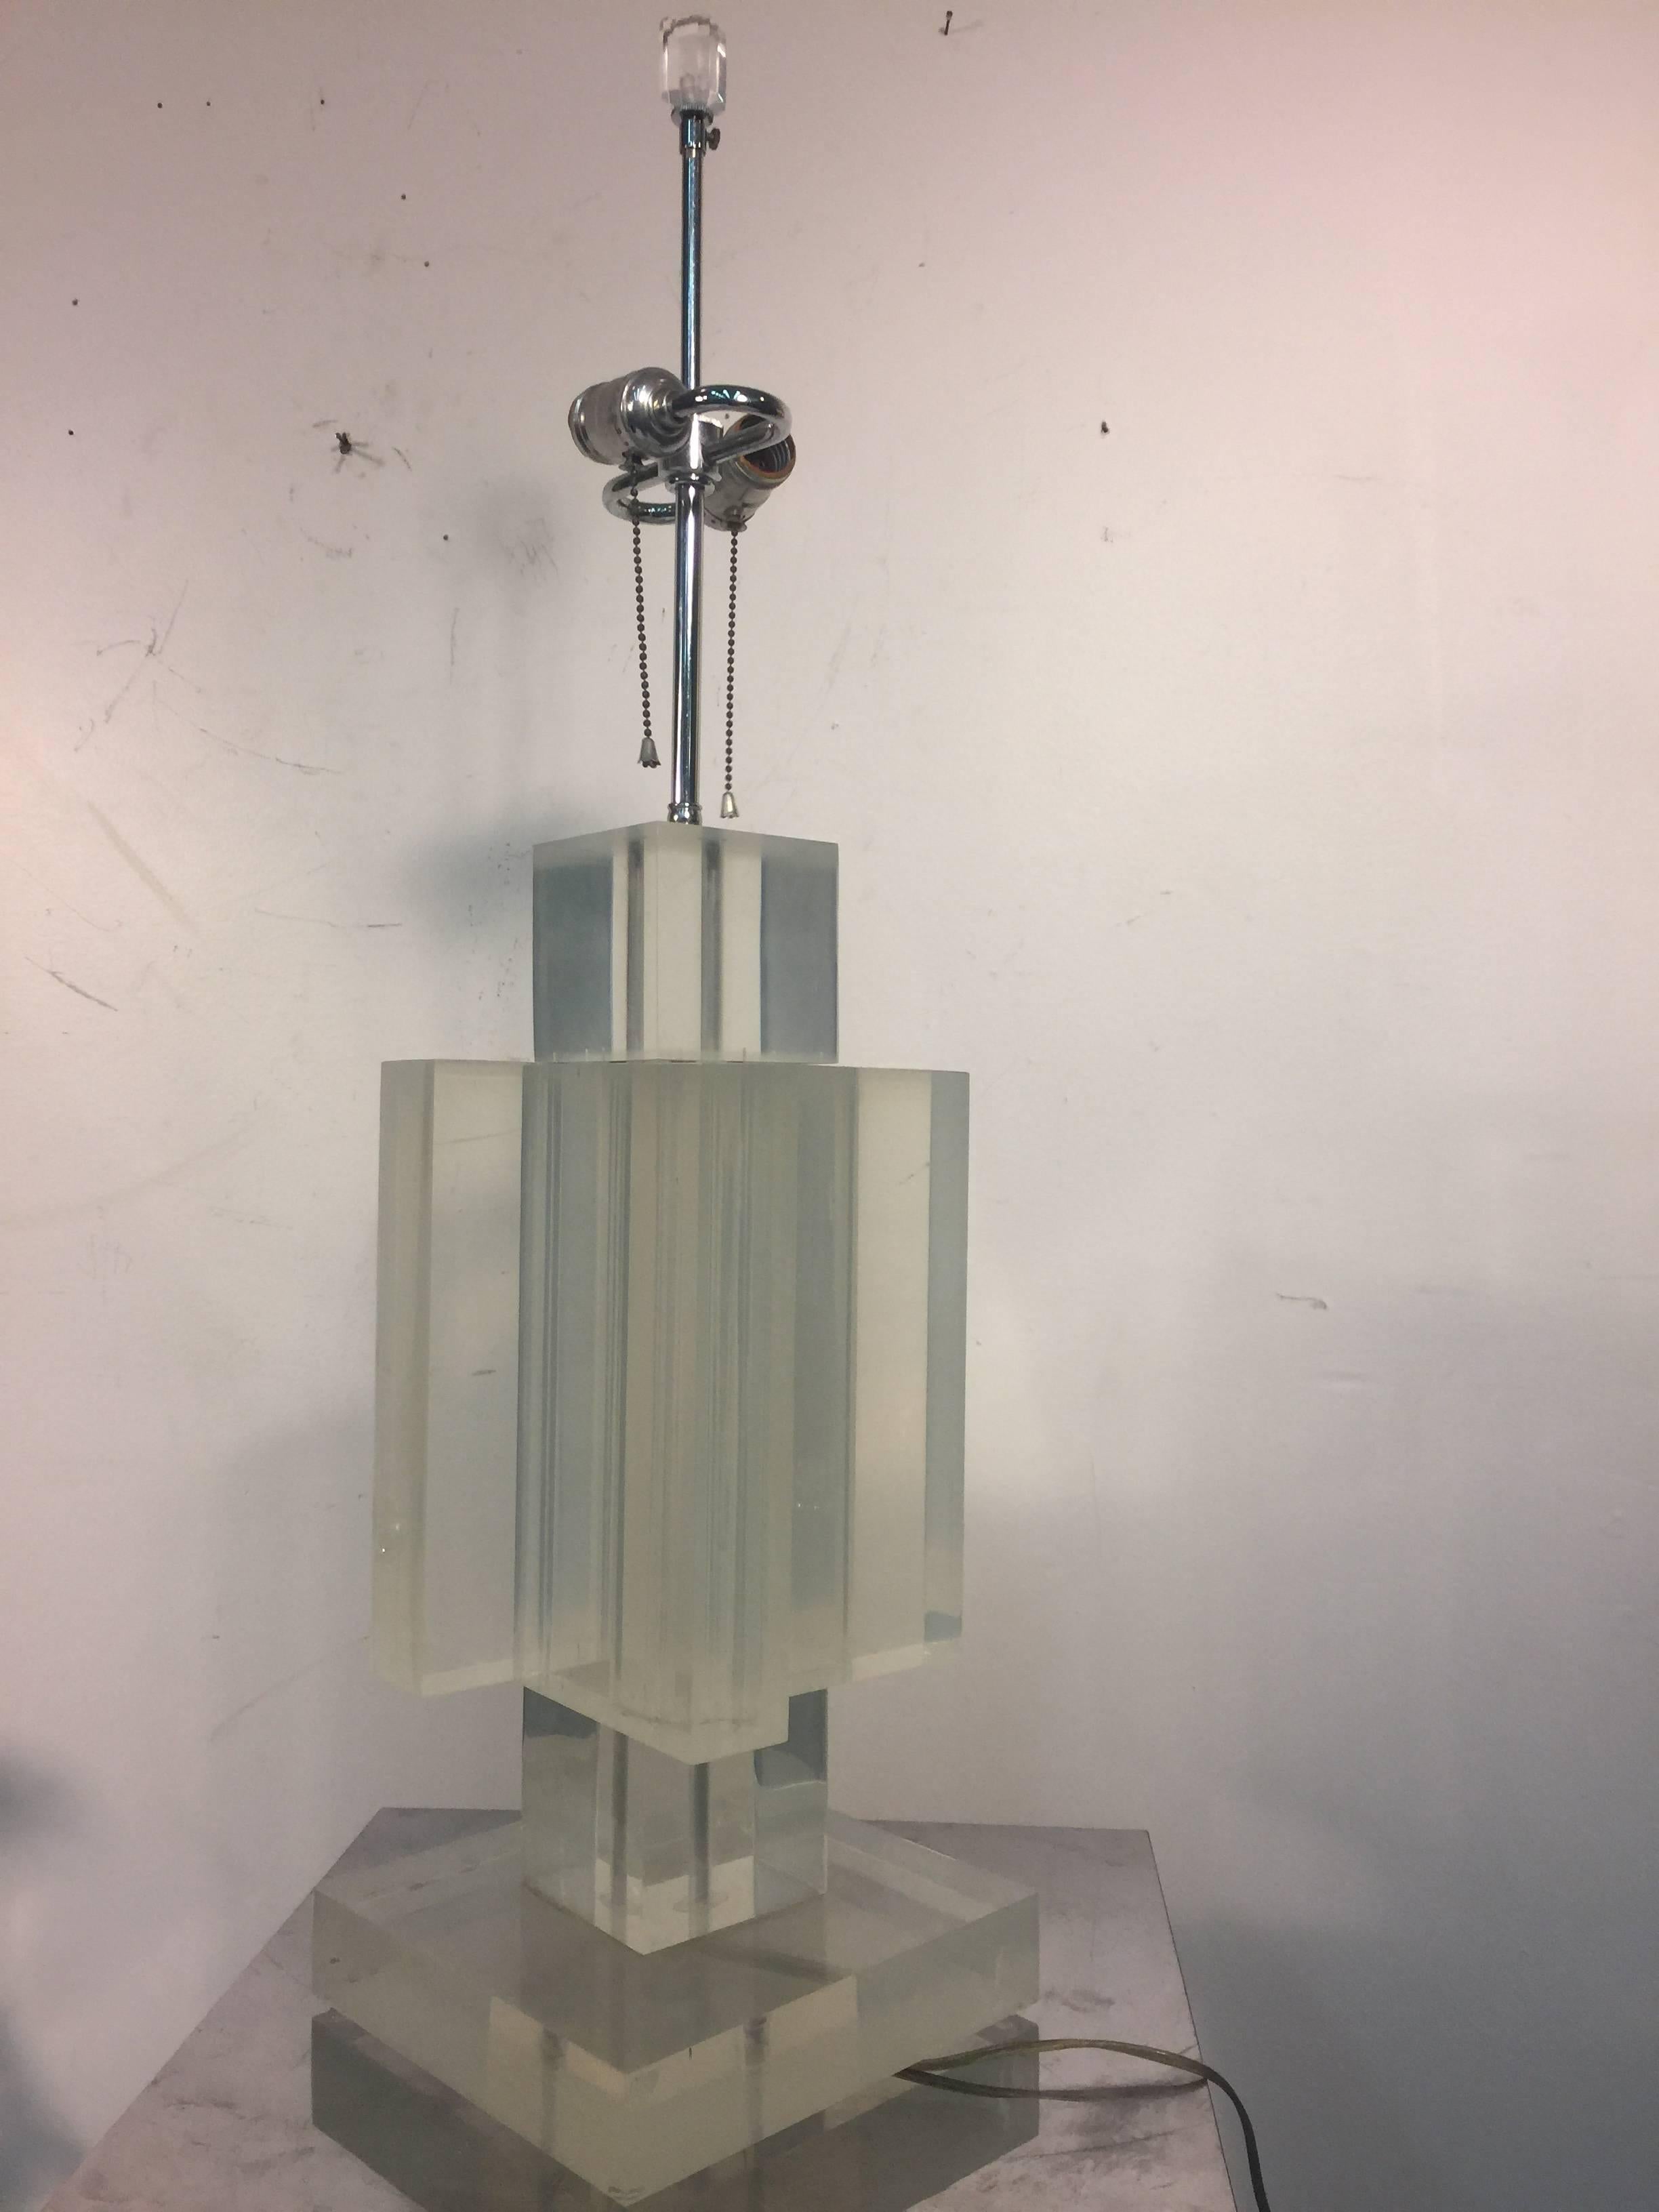 Sensational Set of Two Solid Lucite Table Lamps In Good Condition For Sale In Mount Penn, PA